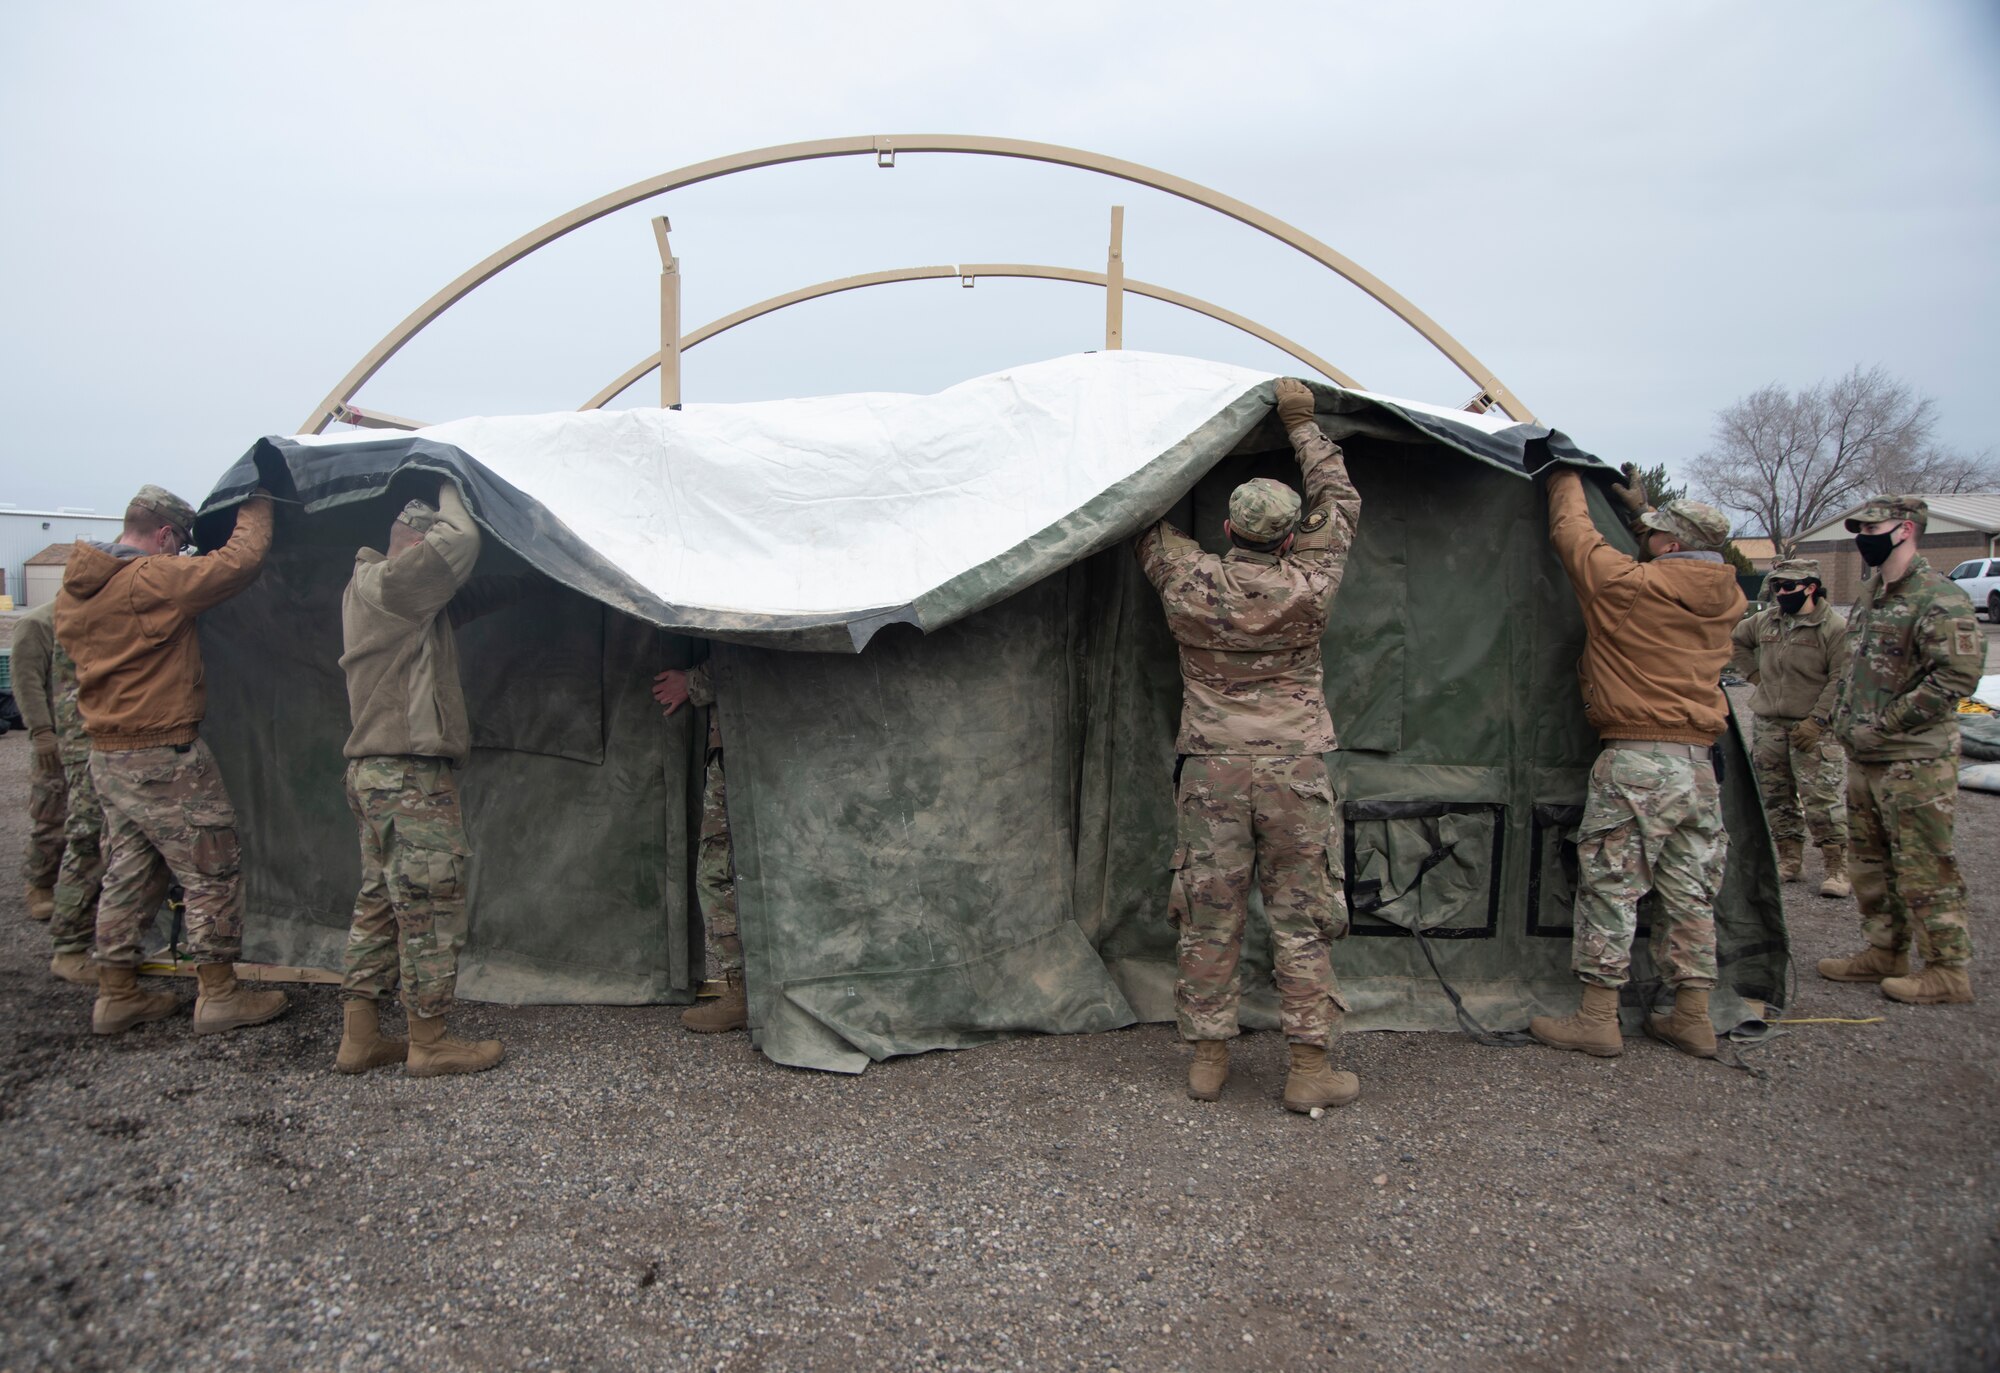 A group of Airmen lifts a door frame of a small shelter system tent.